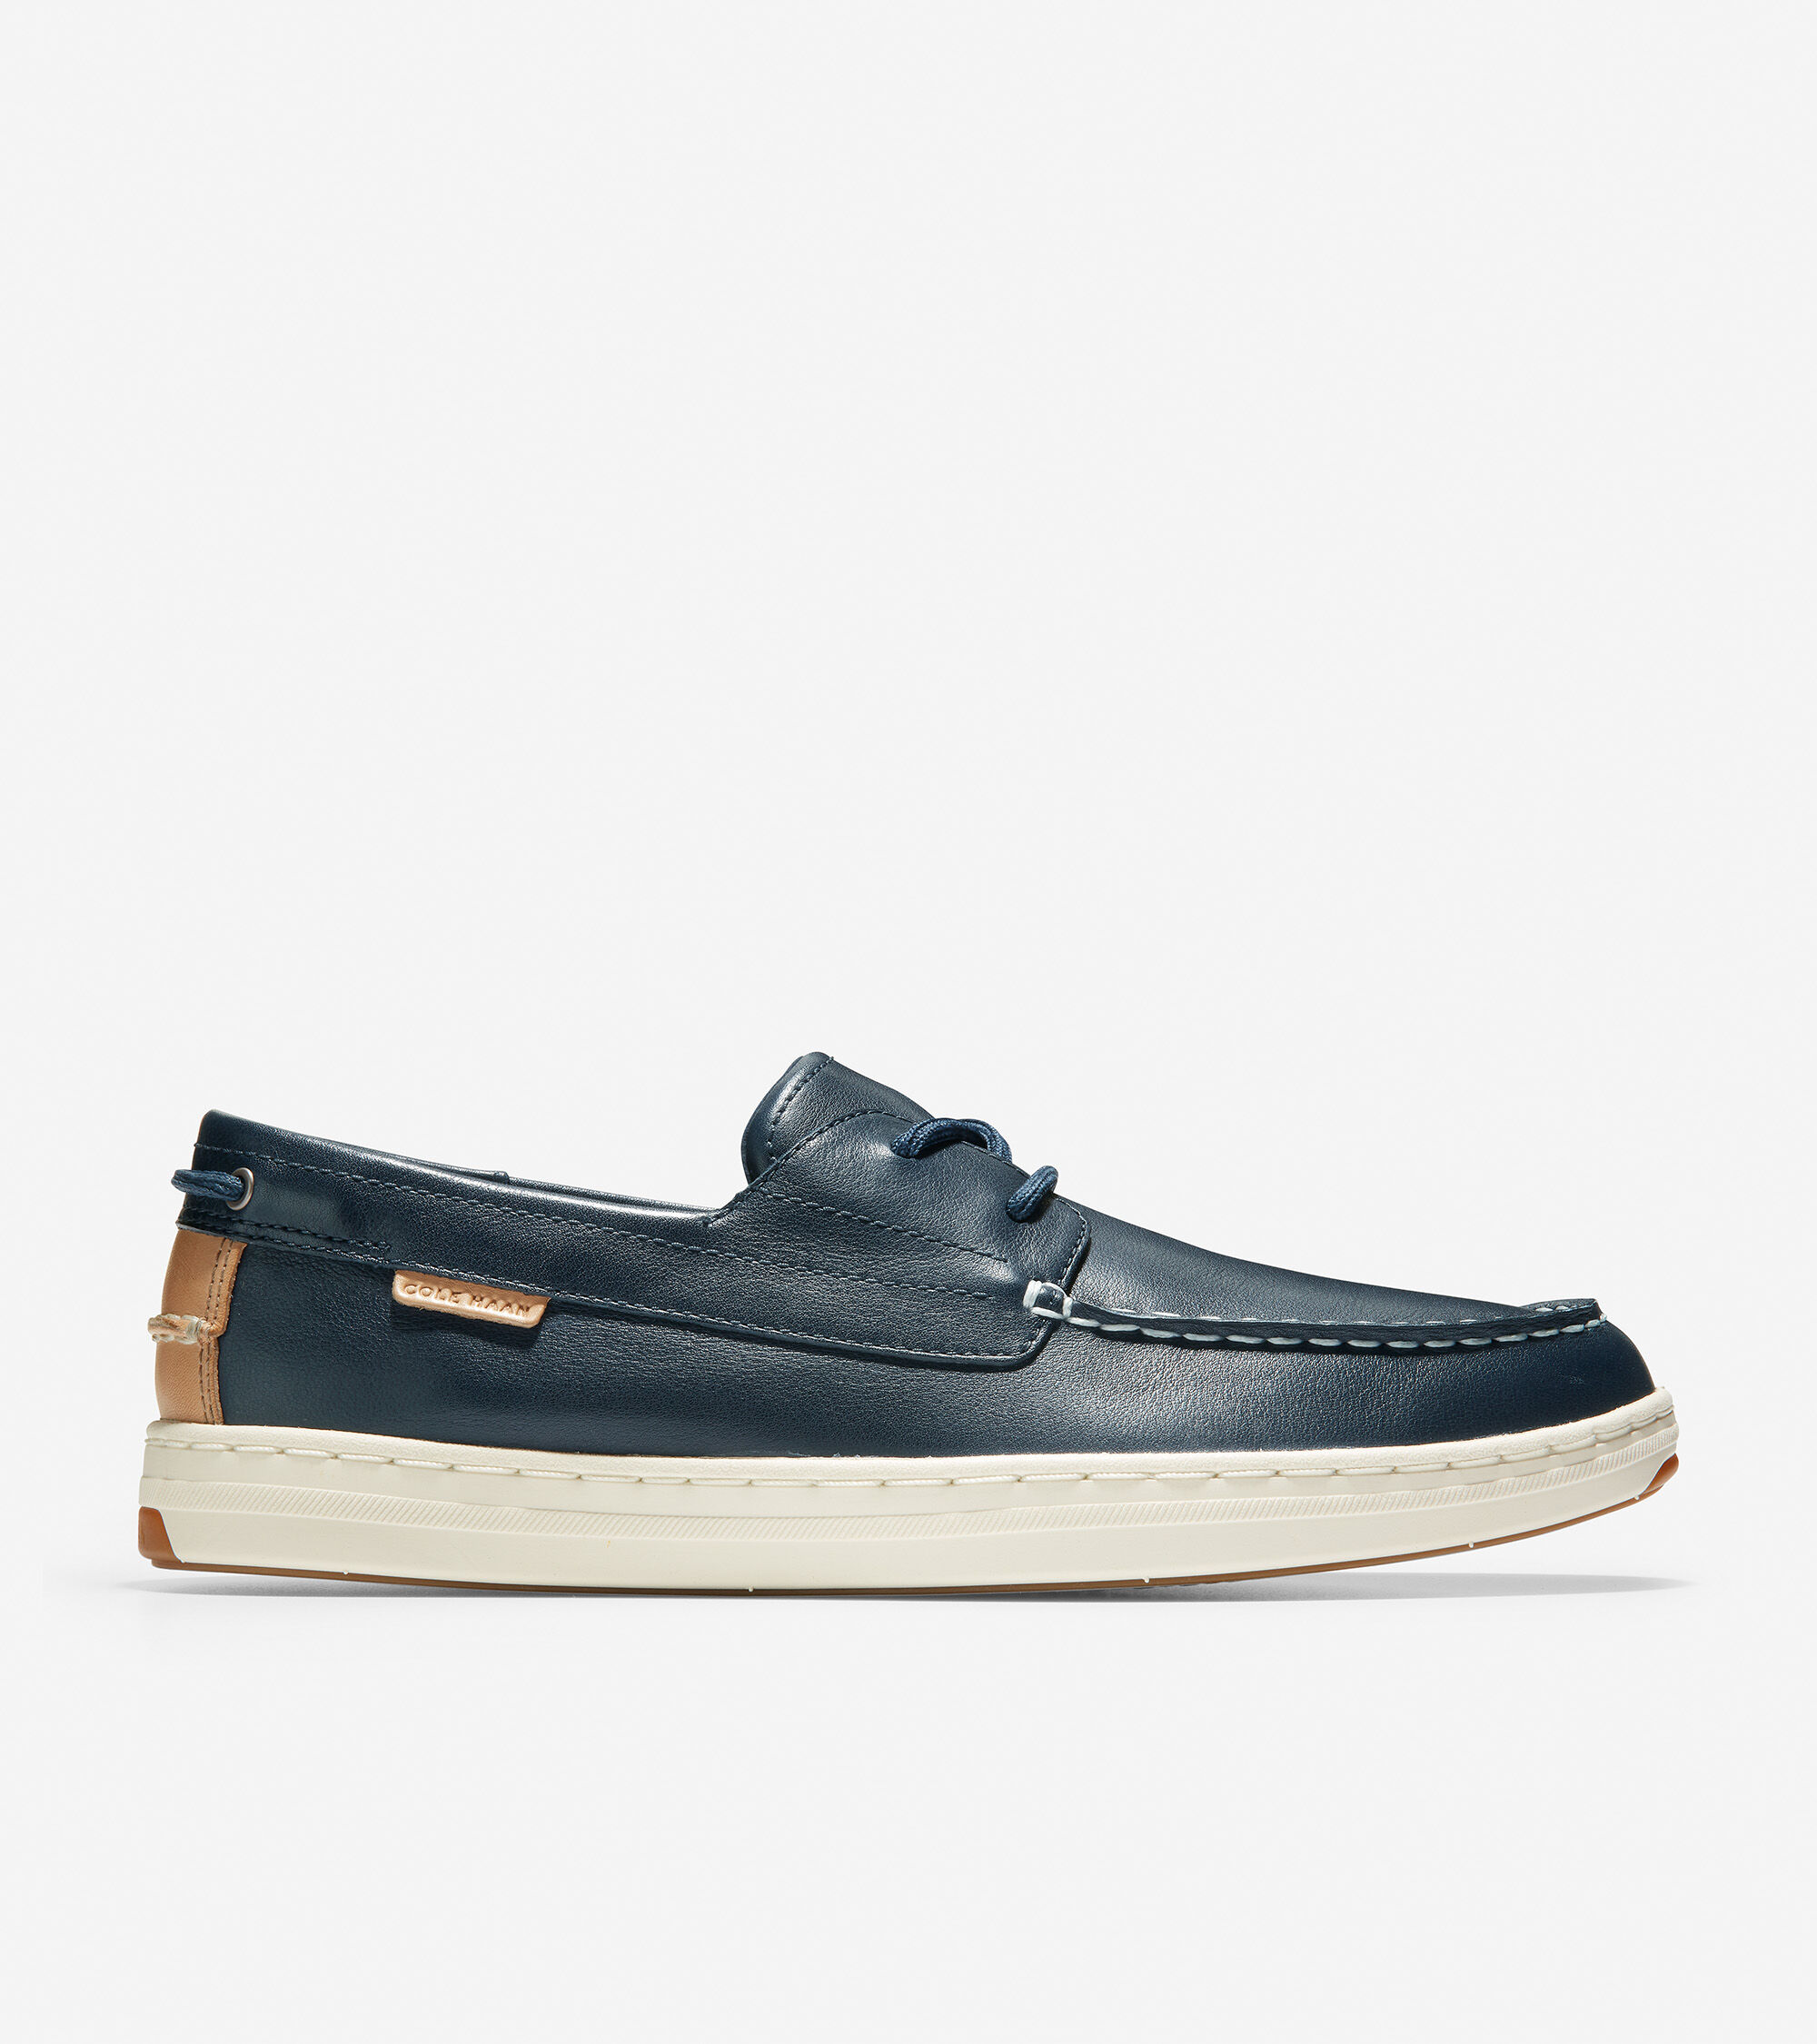 Cloudfeel Boat Shoe in Navy Ink Leather 